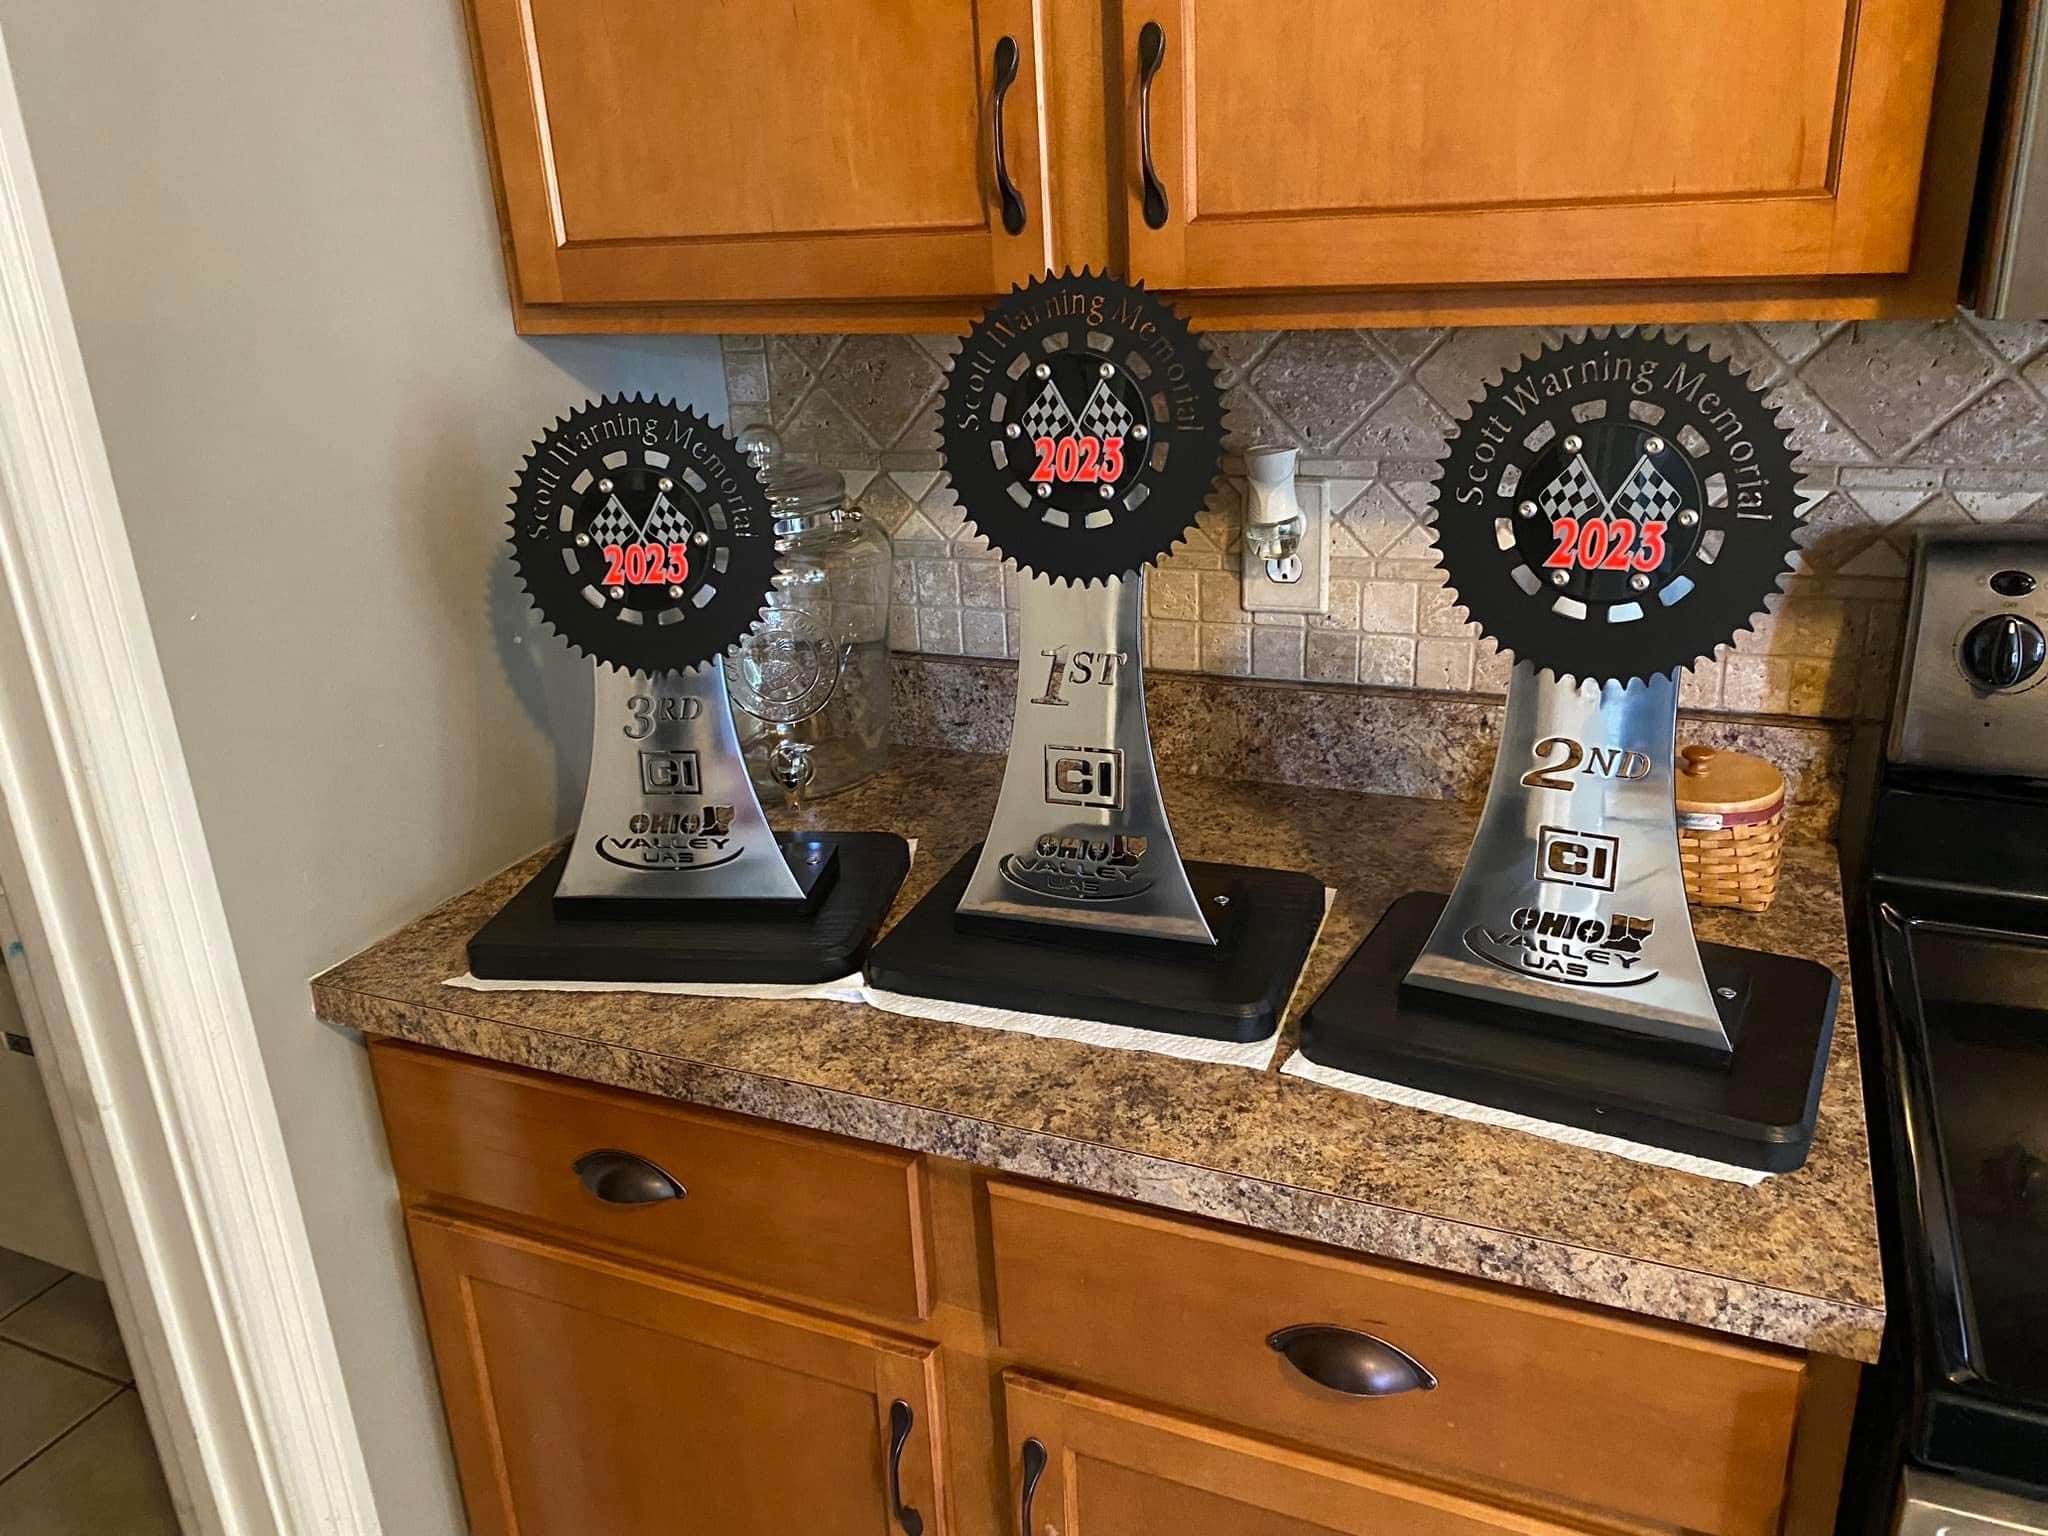  1st-3rd place trophies made by Diecraft Engineering 